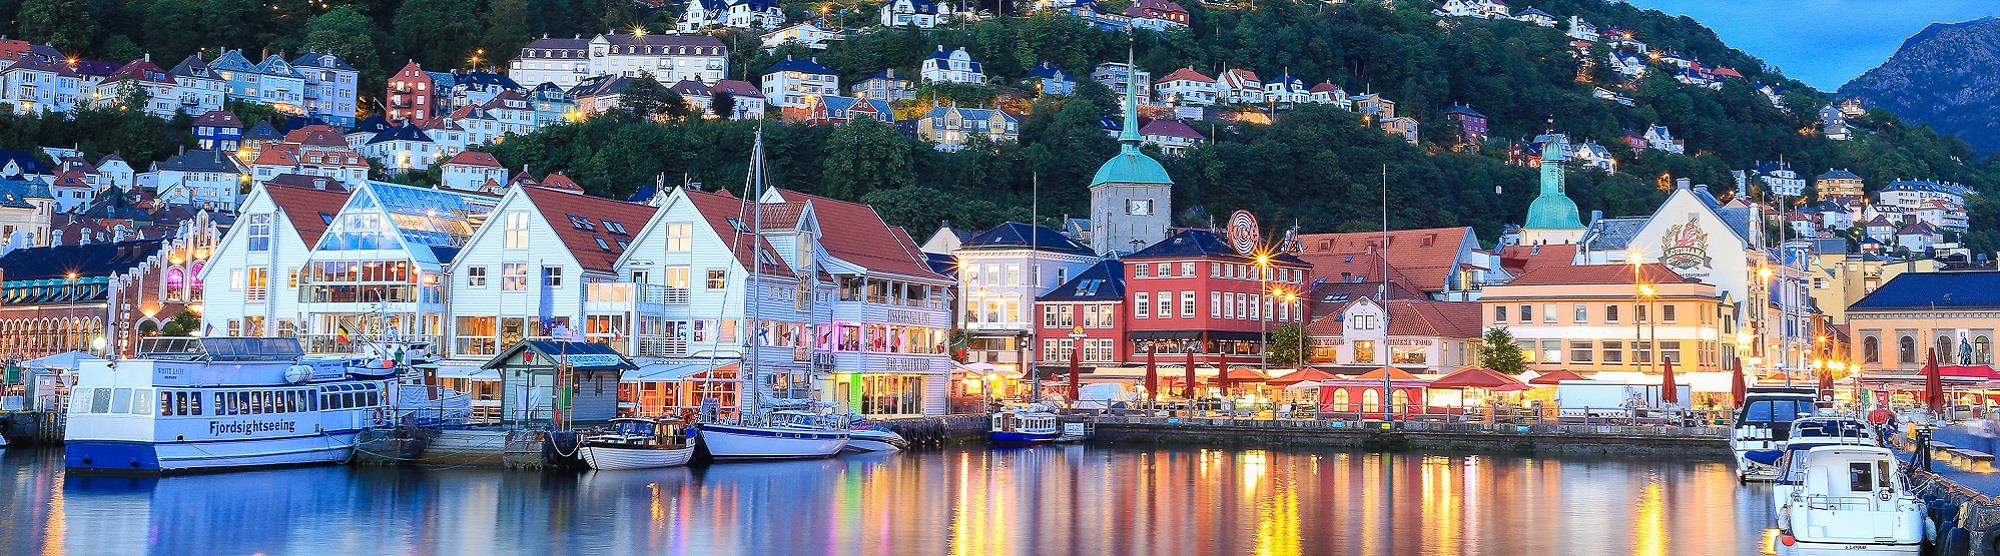 Top 5 things to do in Bergen